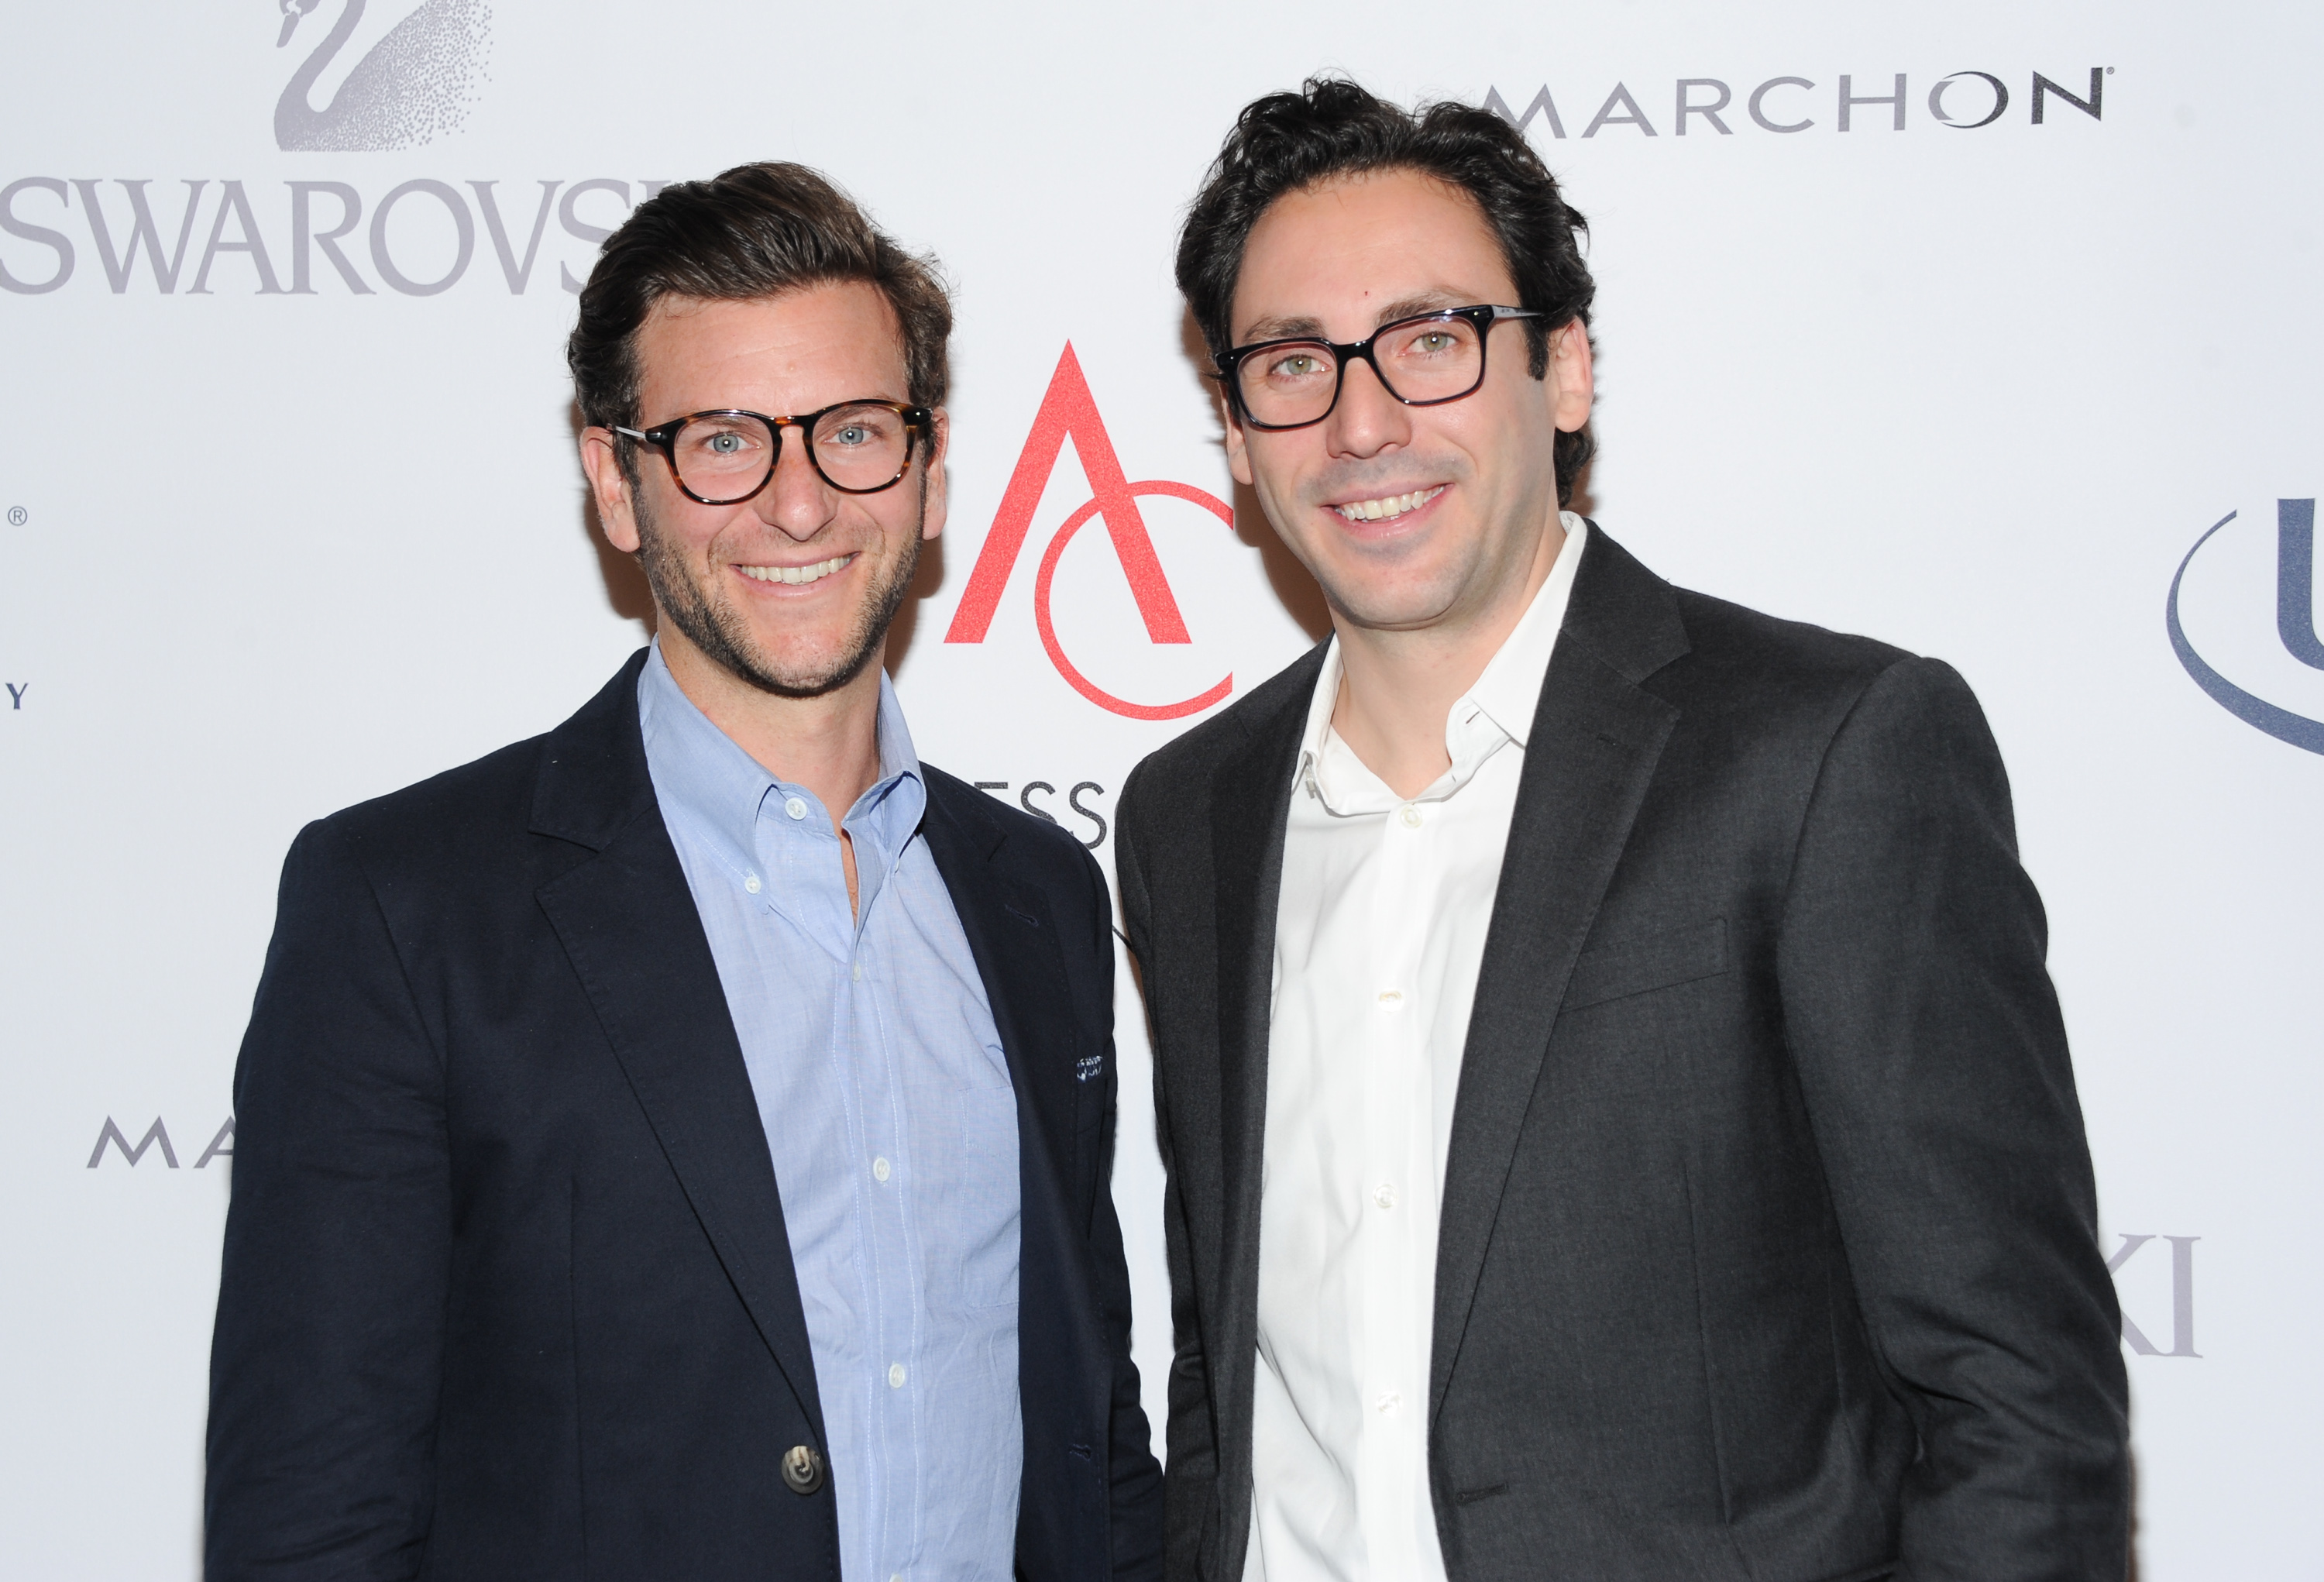 Warby Parker founders David Gilboa (L) and Neil Blumenthal attend the 17th Annual ACE Awards in New York City on Nov. 4, 2013. (Evan Agostini—AP)